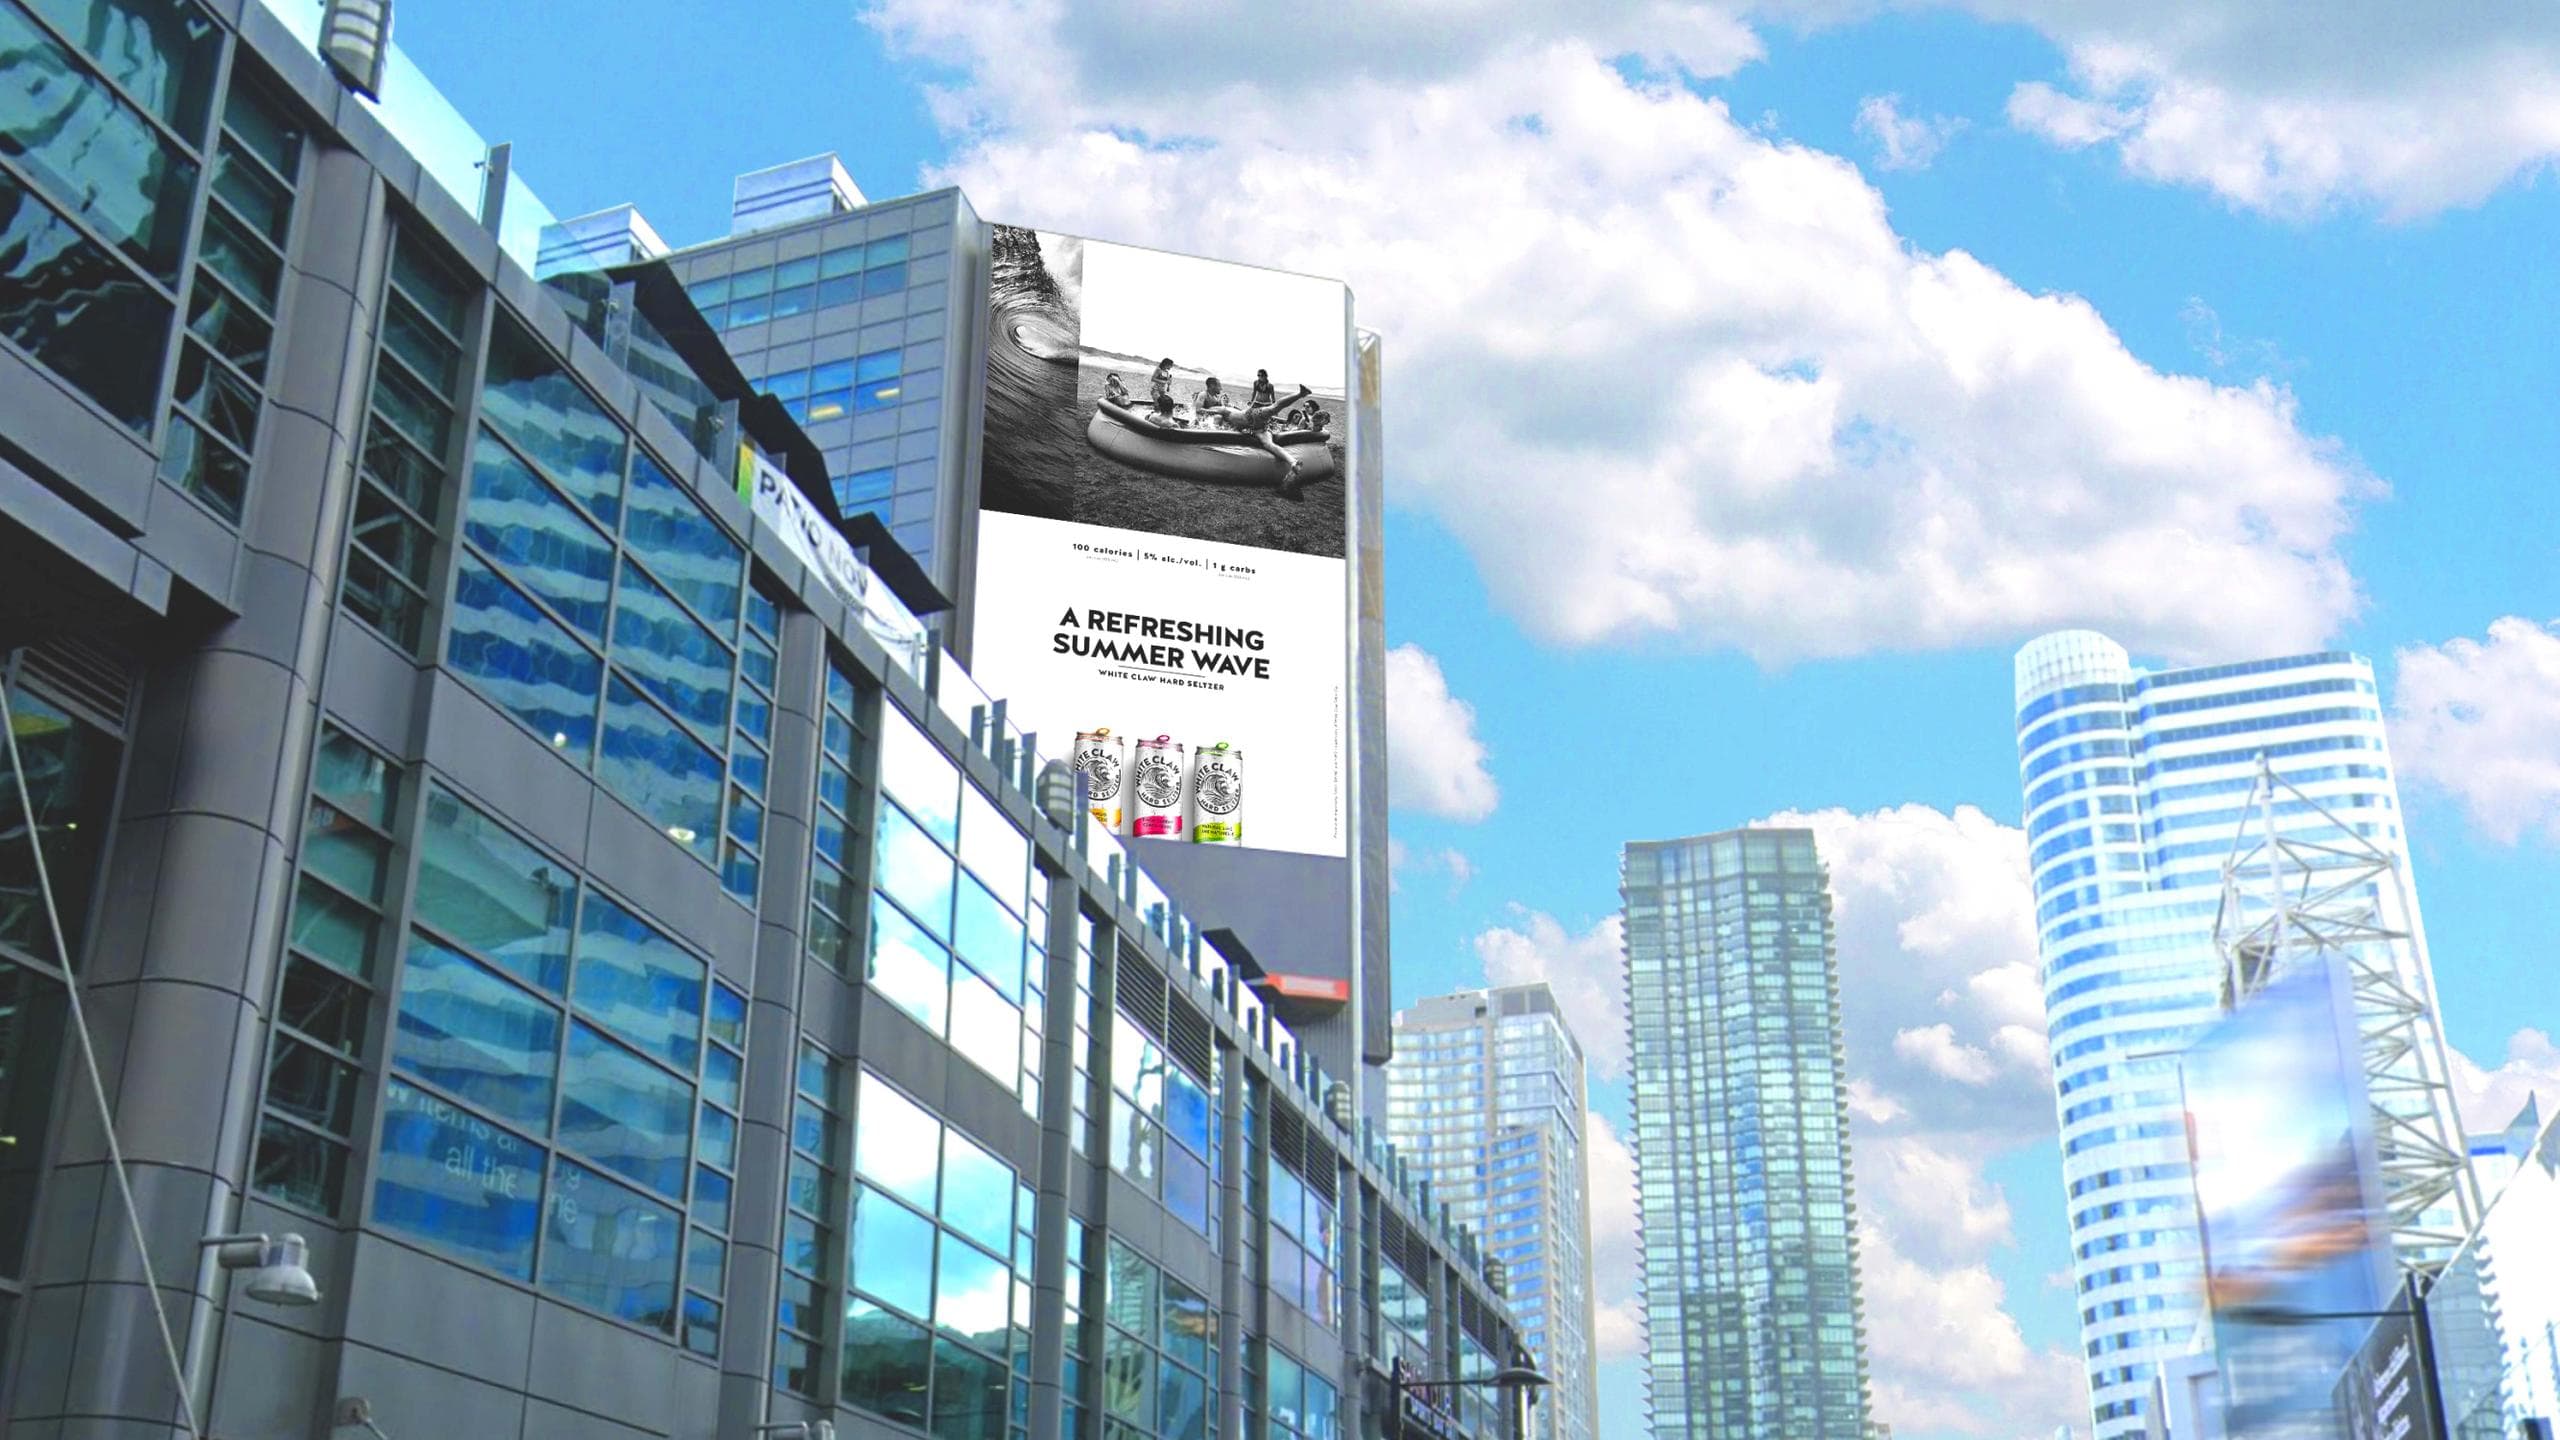 White Claw® & Hivestack: riding the wave with programmatic digital out of home (DOOH)